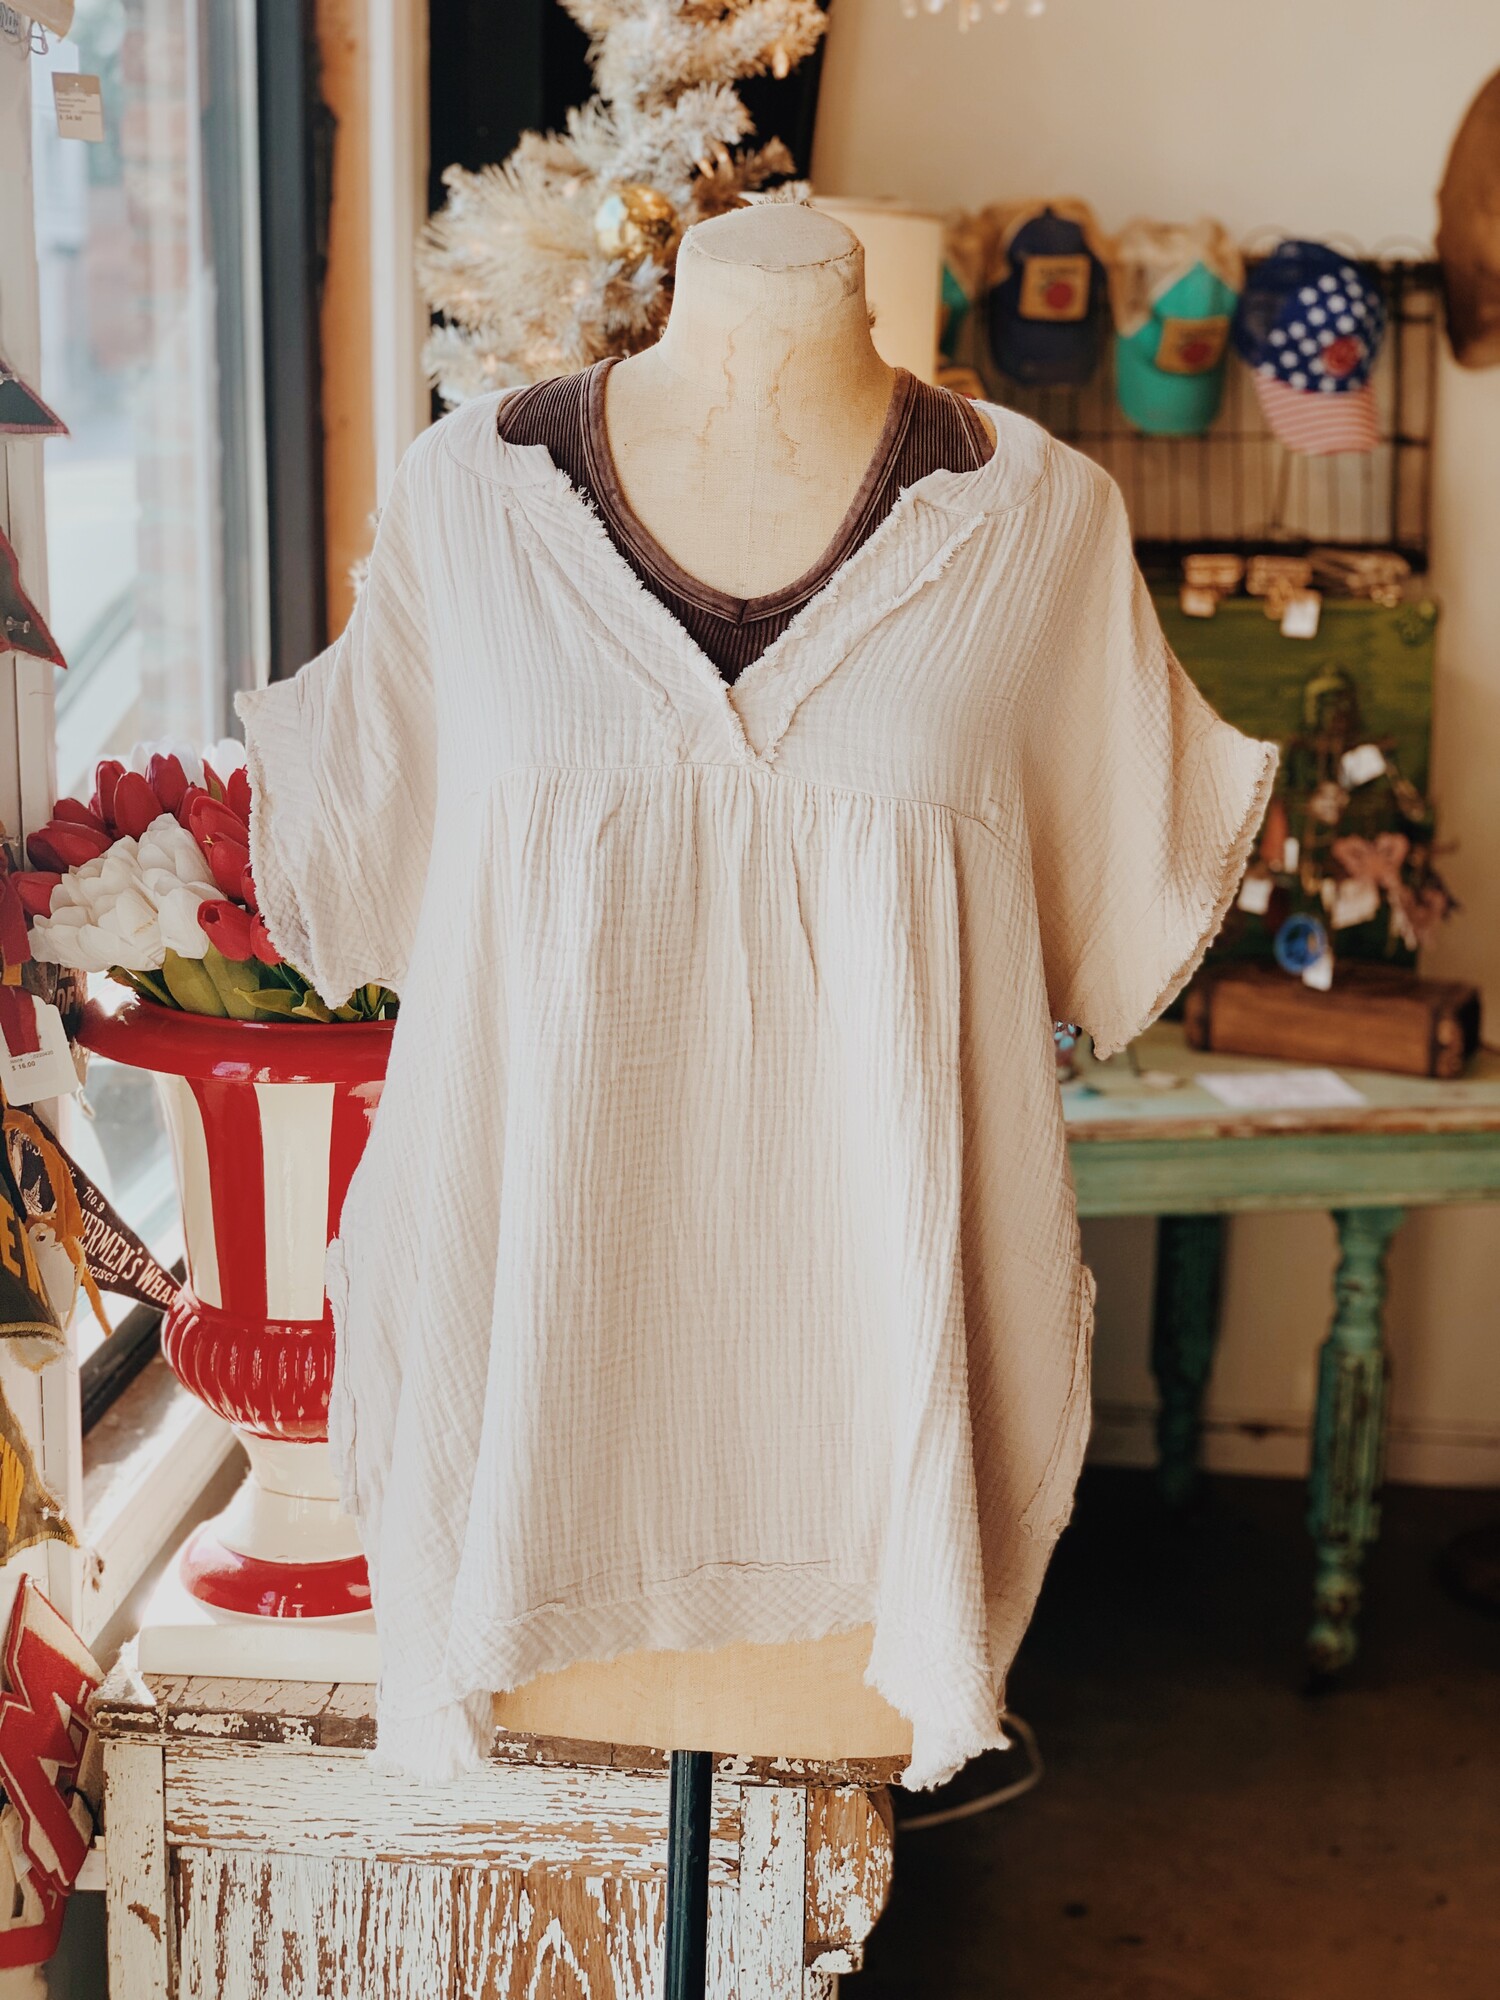 These gauze tops make any outfit unique! Pair these with a necklace and leggings, and you are ready to go!